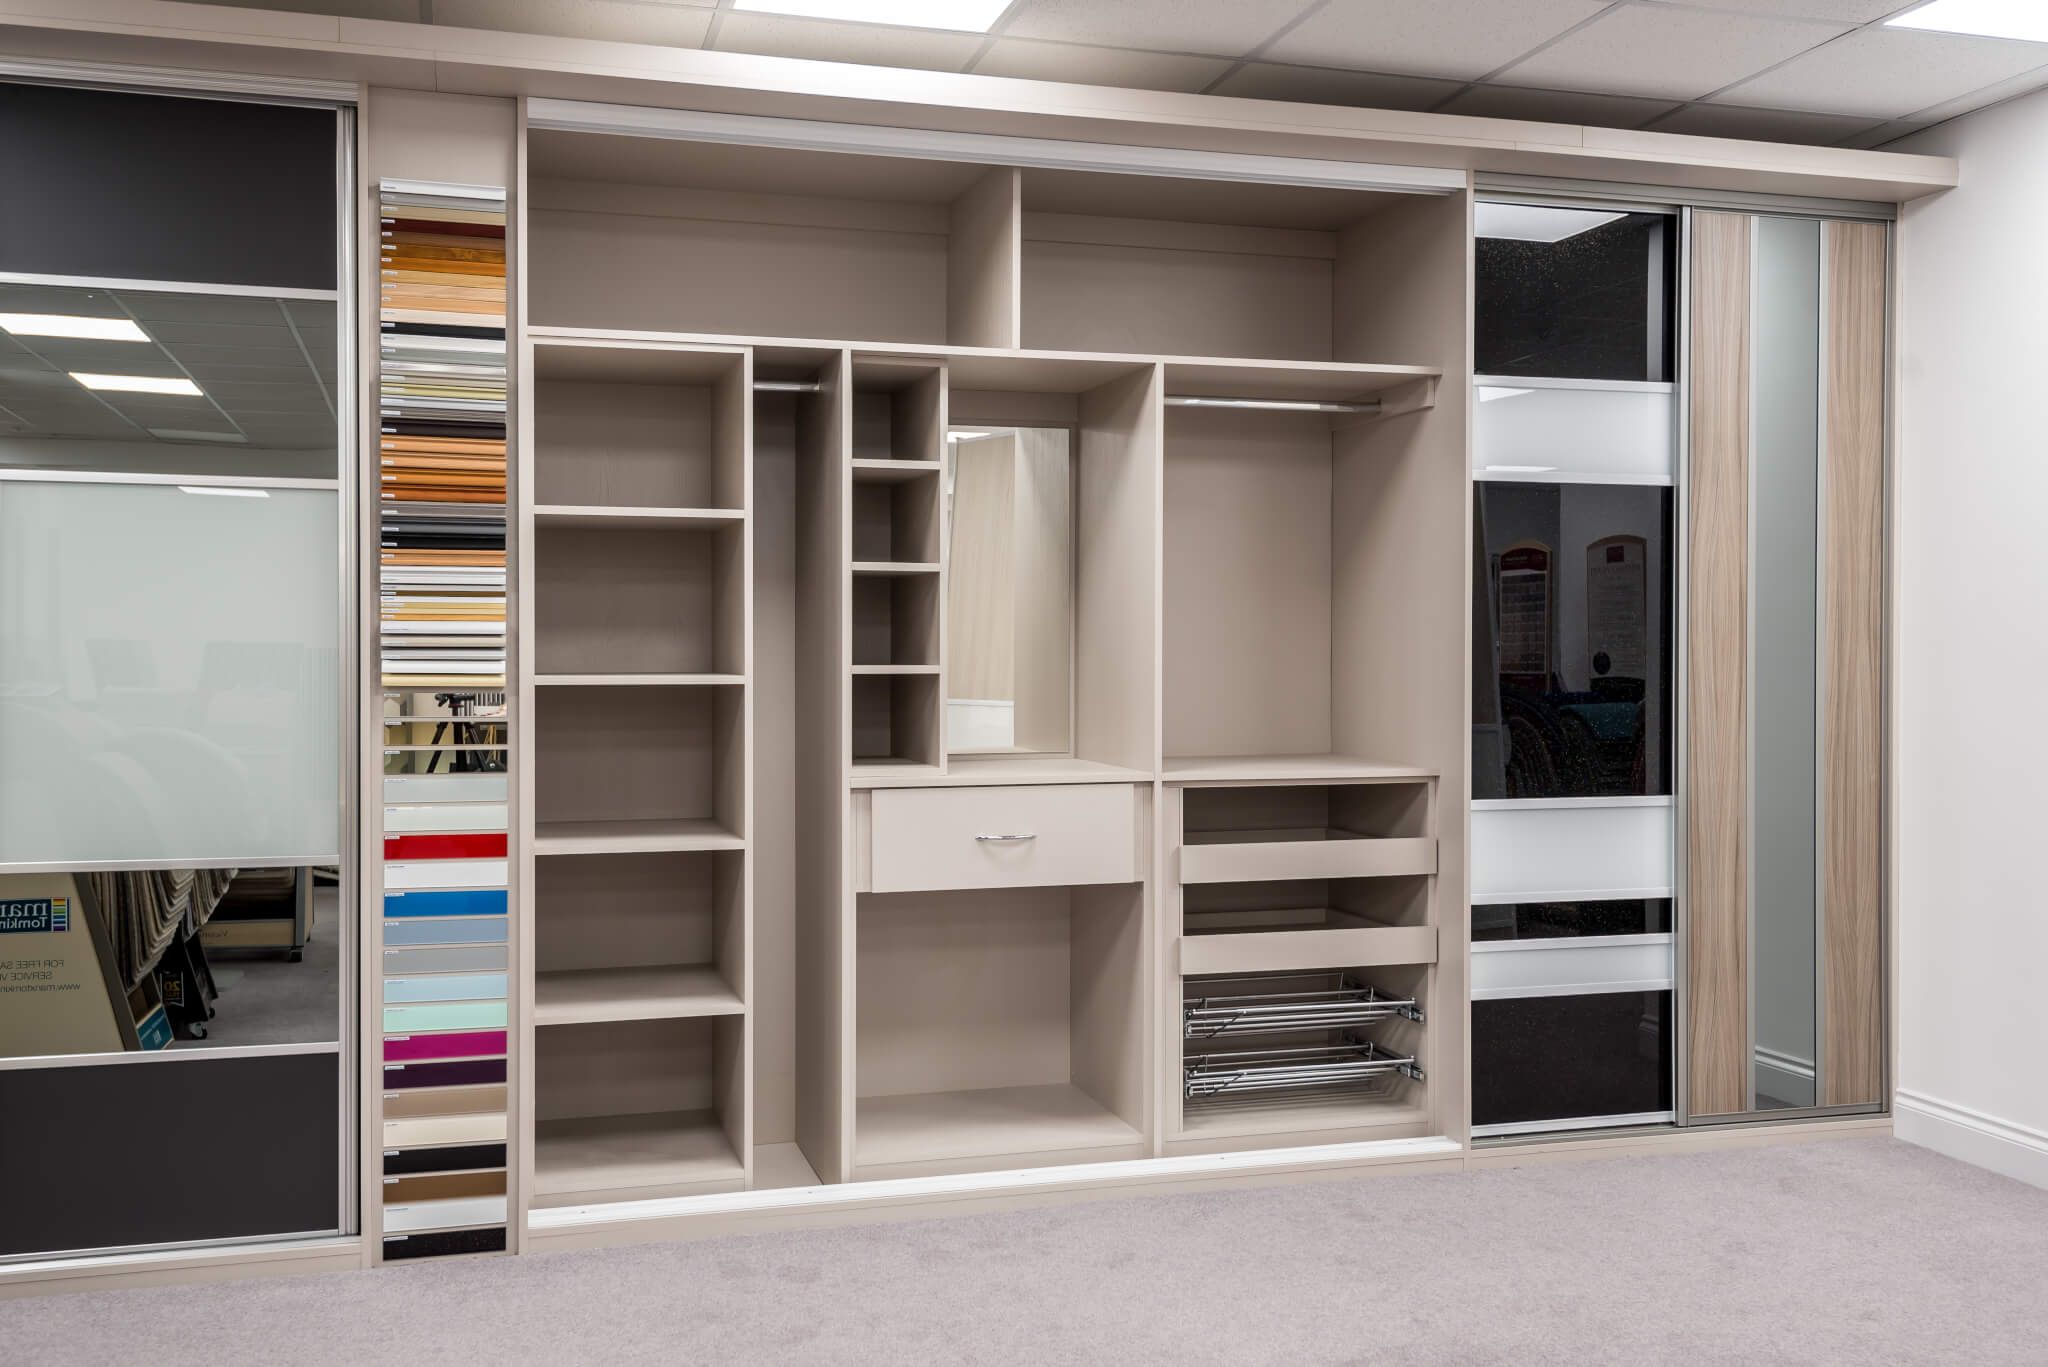 Designing The Perfect Fitted Wardrobe: Shelves Vs Drawers Vs Hanging Space  (which Is Best)? | Millers With Single Wardrobes With Drawers And Shelves (View 12 of 15)